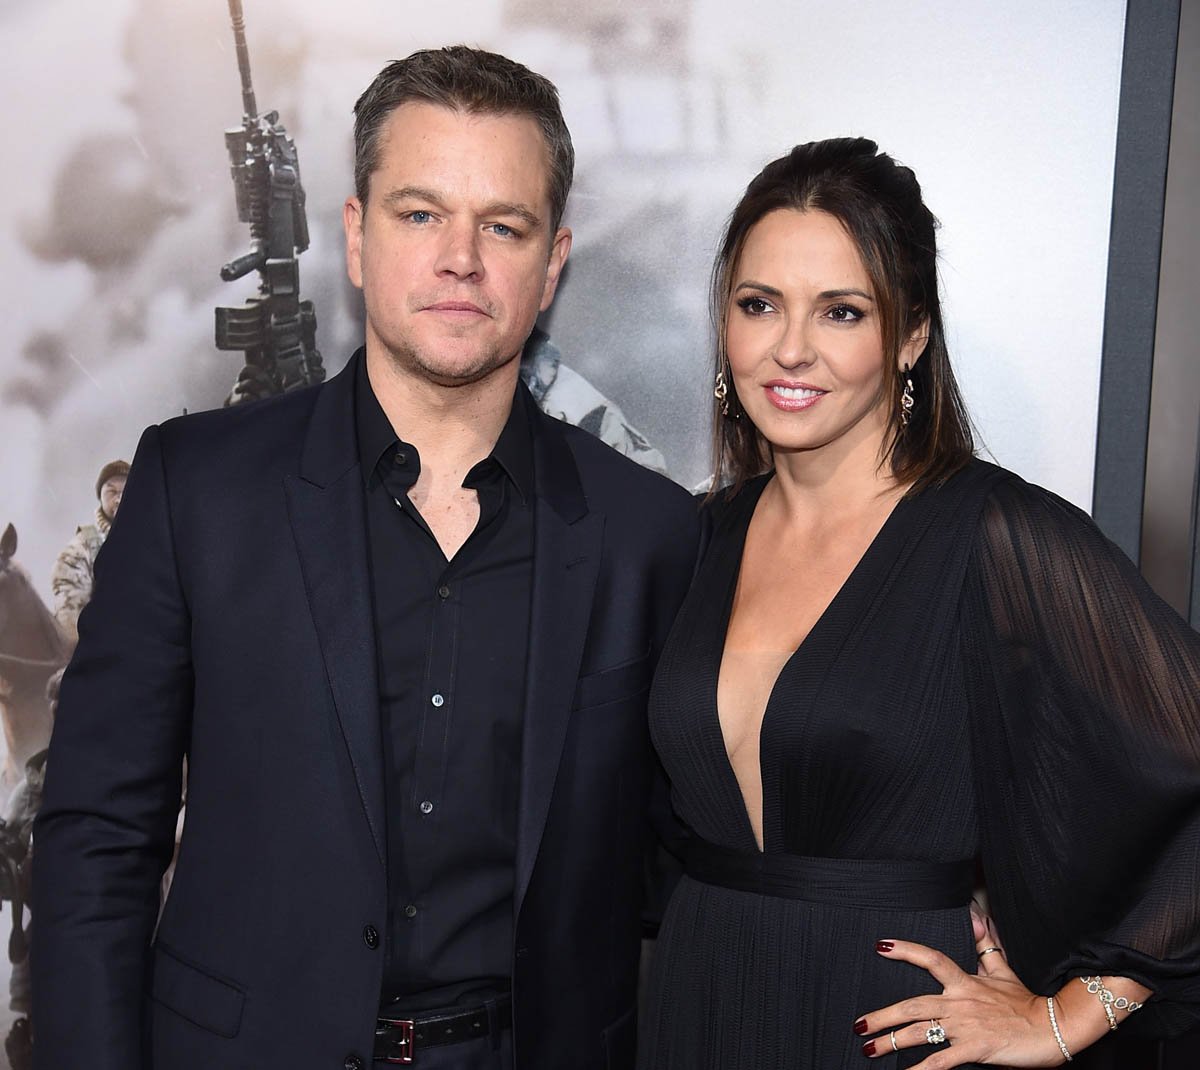 Matt Damon says he needs to close his mouth and get in the back seat